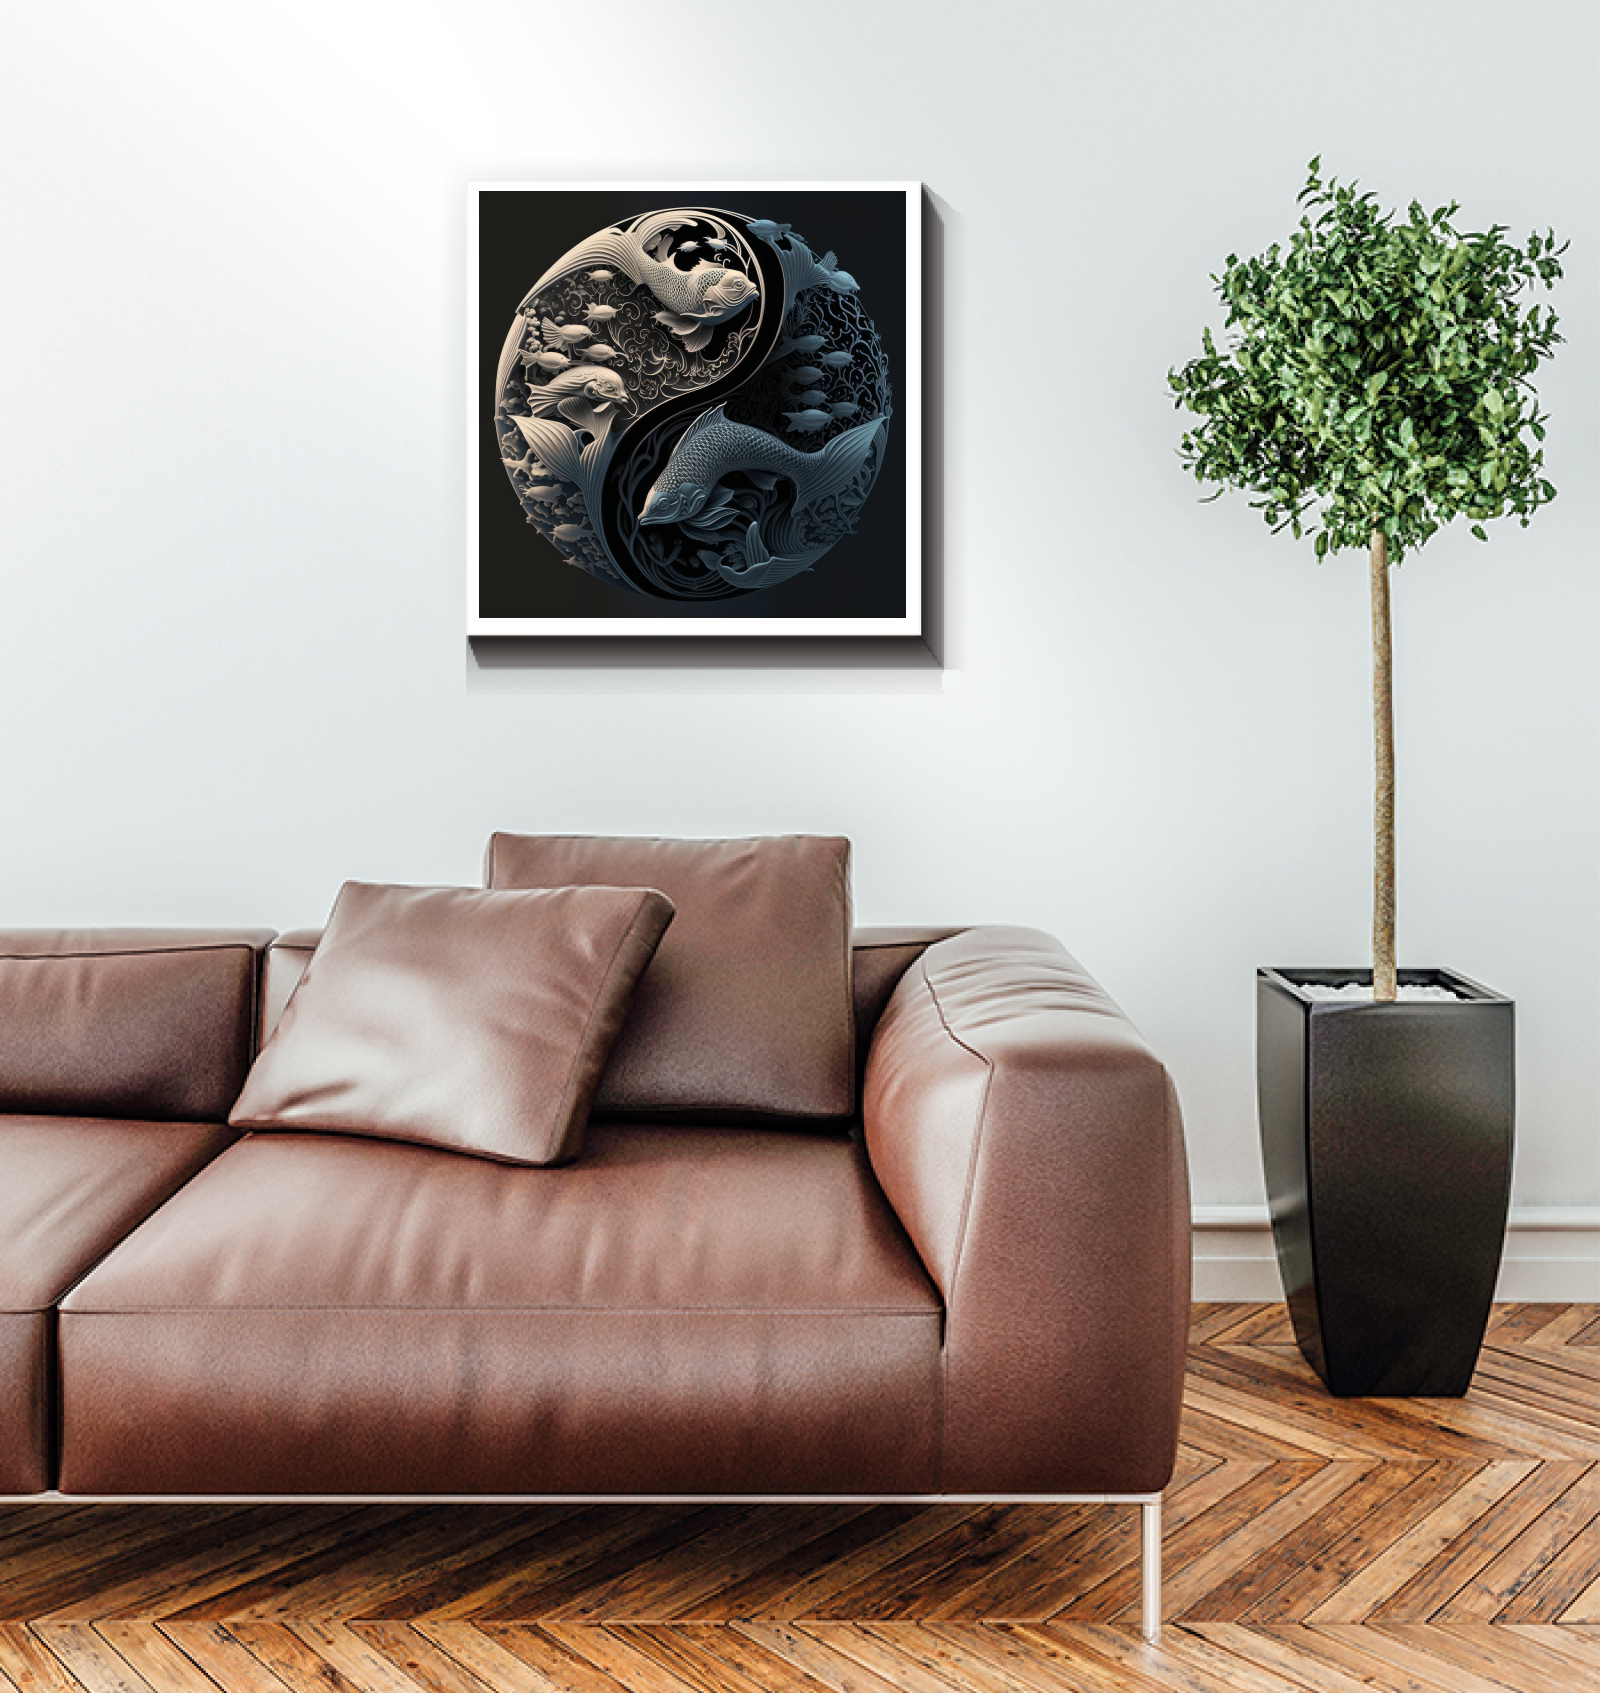 Decorative canvas with artistic depiction of equinox balance.